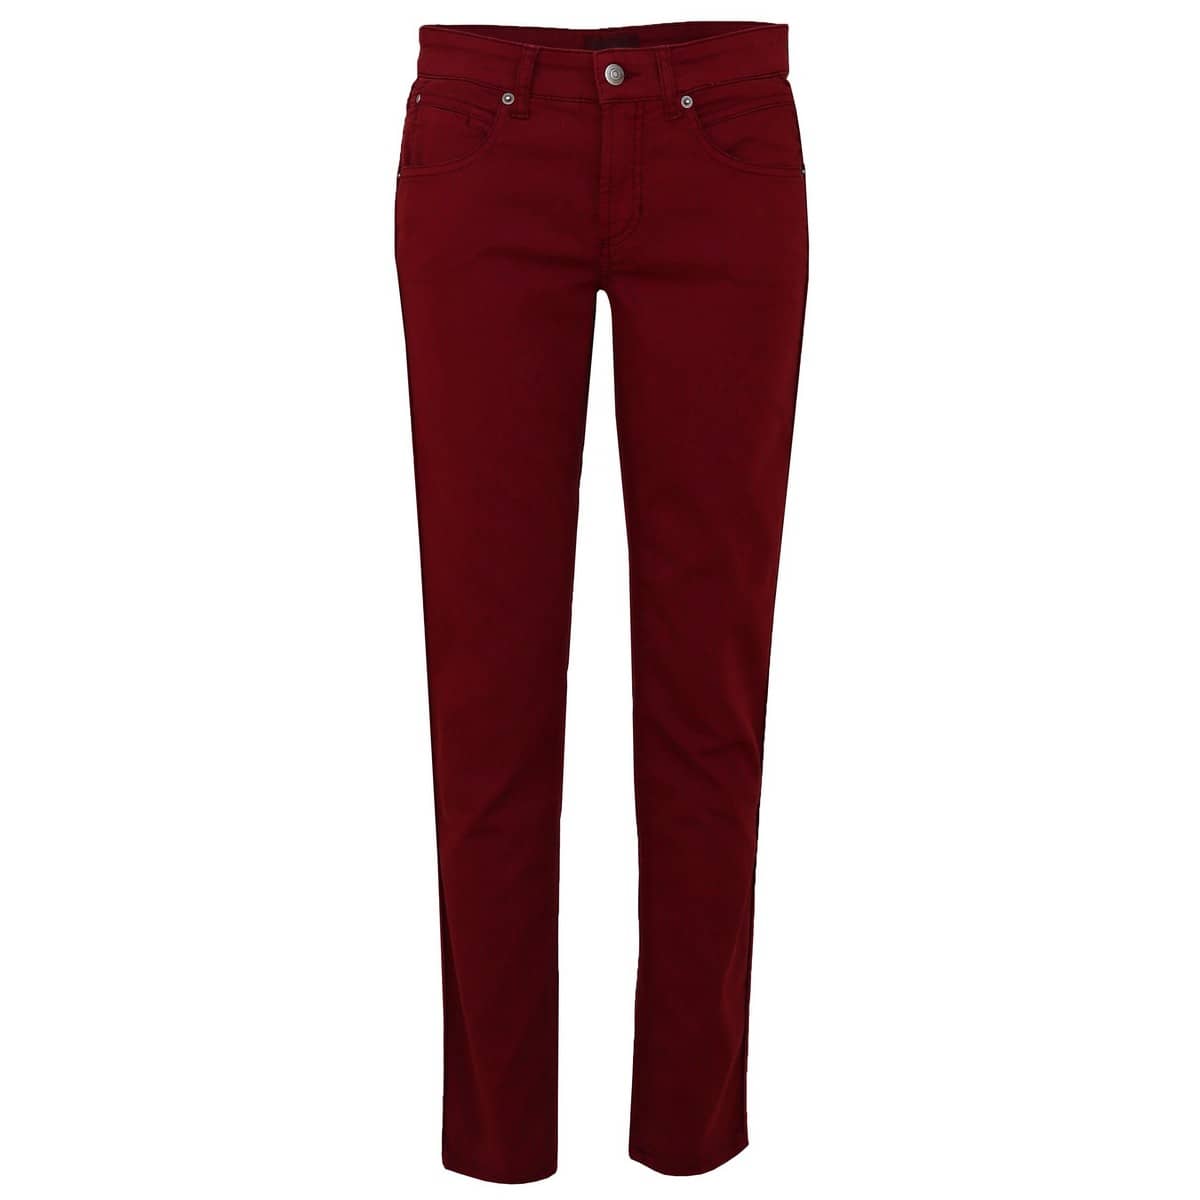 drijvend Onhandig Fjord Cambio • bordeaux rode slim fit jeans • shop BollyWolly